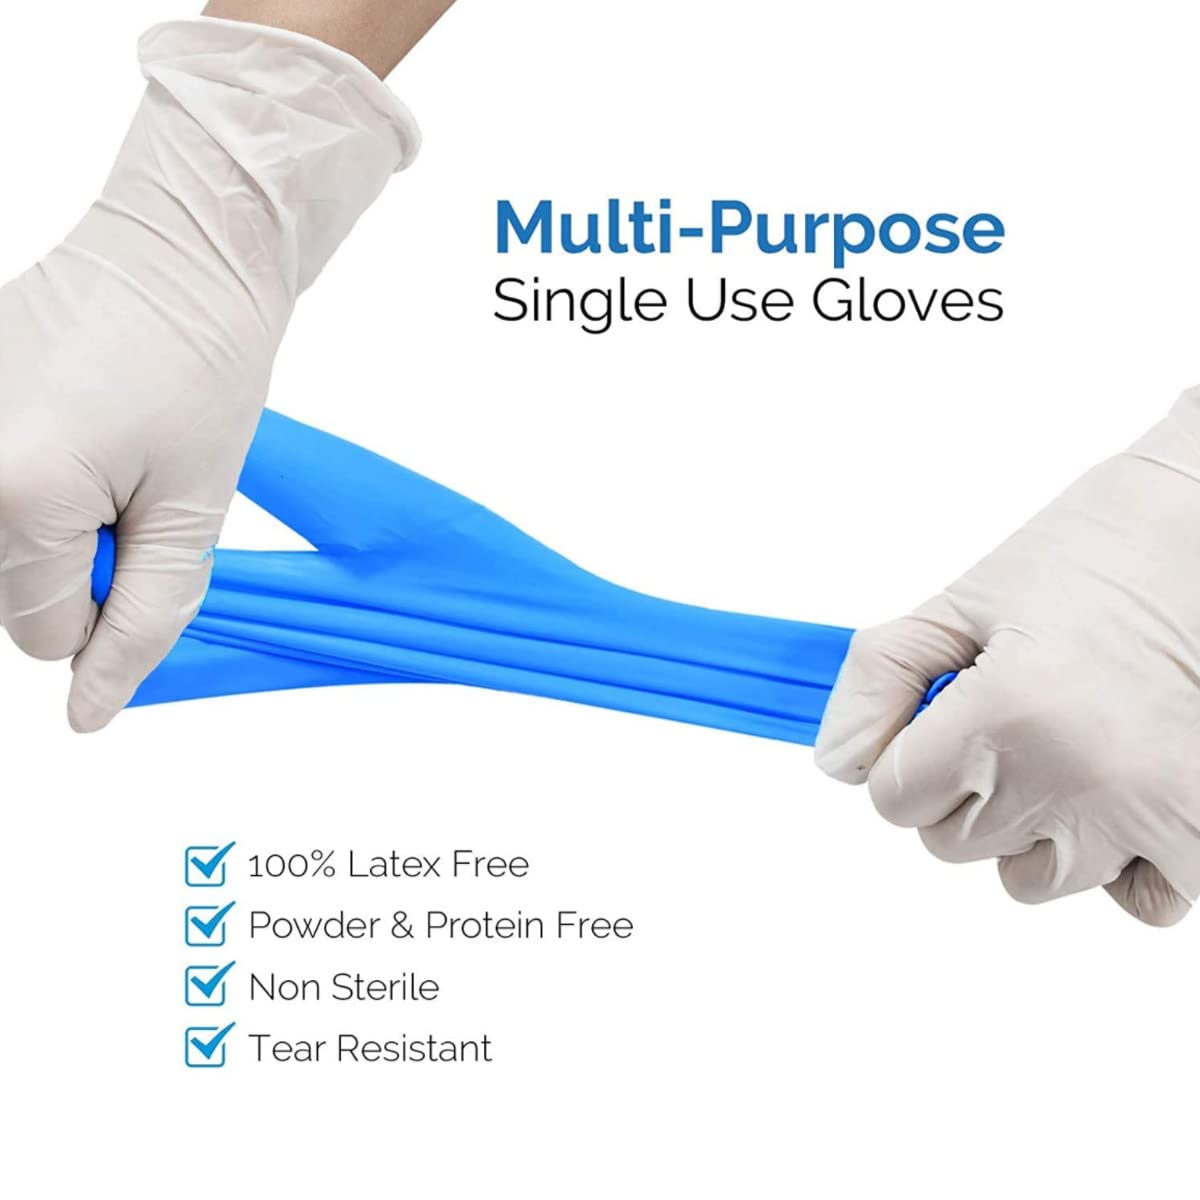 Jointown Basic Medical Synmax Vinyl Exam Gloves - Latex-Free & Powder-Free - Large, BMPF-3003 Blue Box of 100